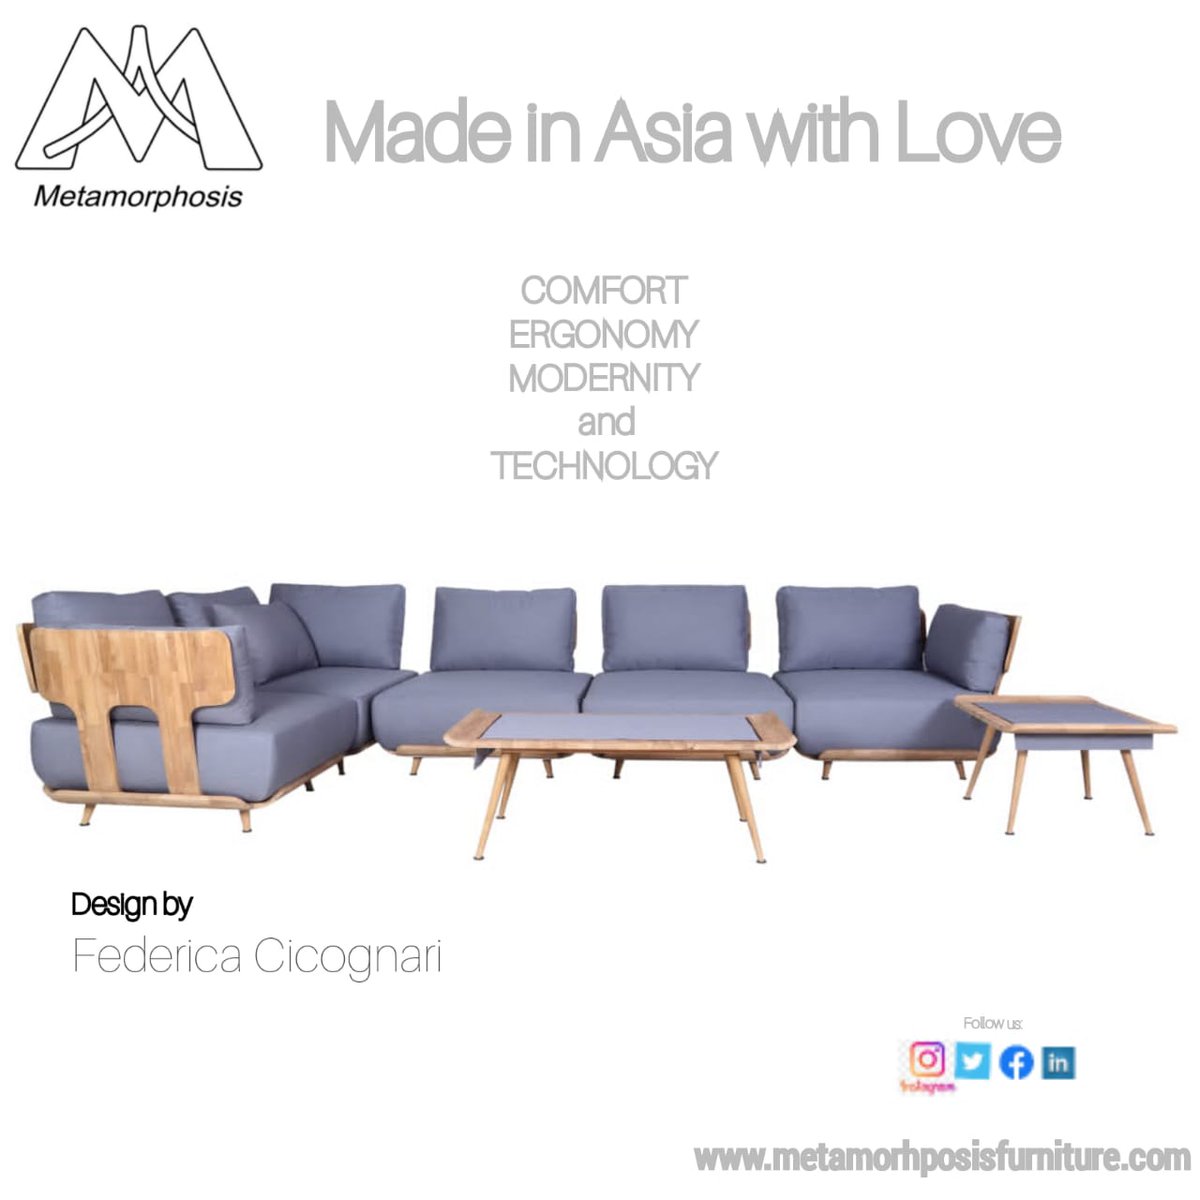 This collection guarantees comfort and durability.

An Italian design, Made in Asia with love.

Bring this at your home. Visit our website metamorphosisfurniture.com

#italiandesignfurniture #luxury
#comfortablefurniture #durabledesign 
#madeinasiawithlove